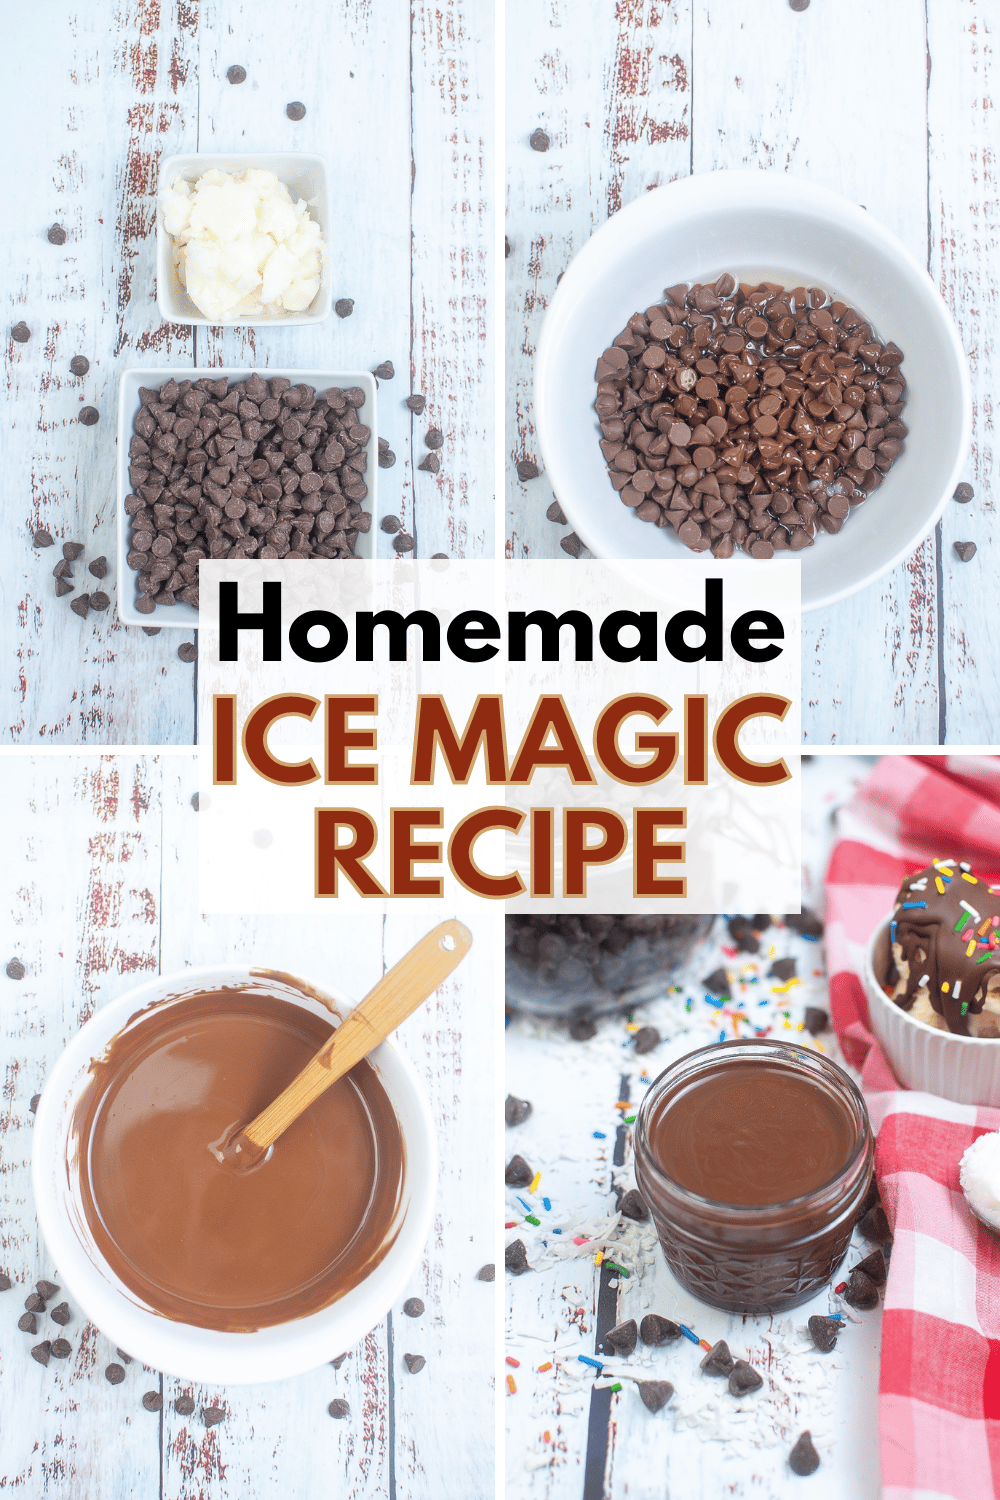 This Ice Magic recipe is a classic! It’s so easy to make with just two ingredients and it hardens instantly when poured over ice cream. #icemagicrecipe #homemadeicemagic #icemagic #icecreamtopping via @wondermomwannab